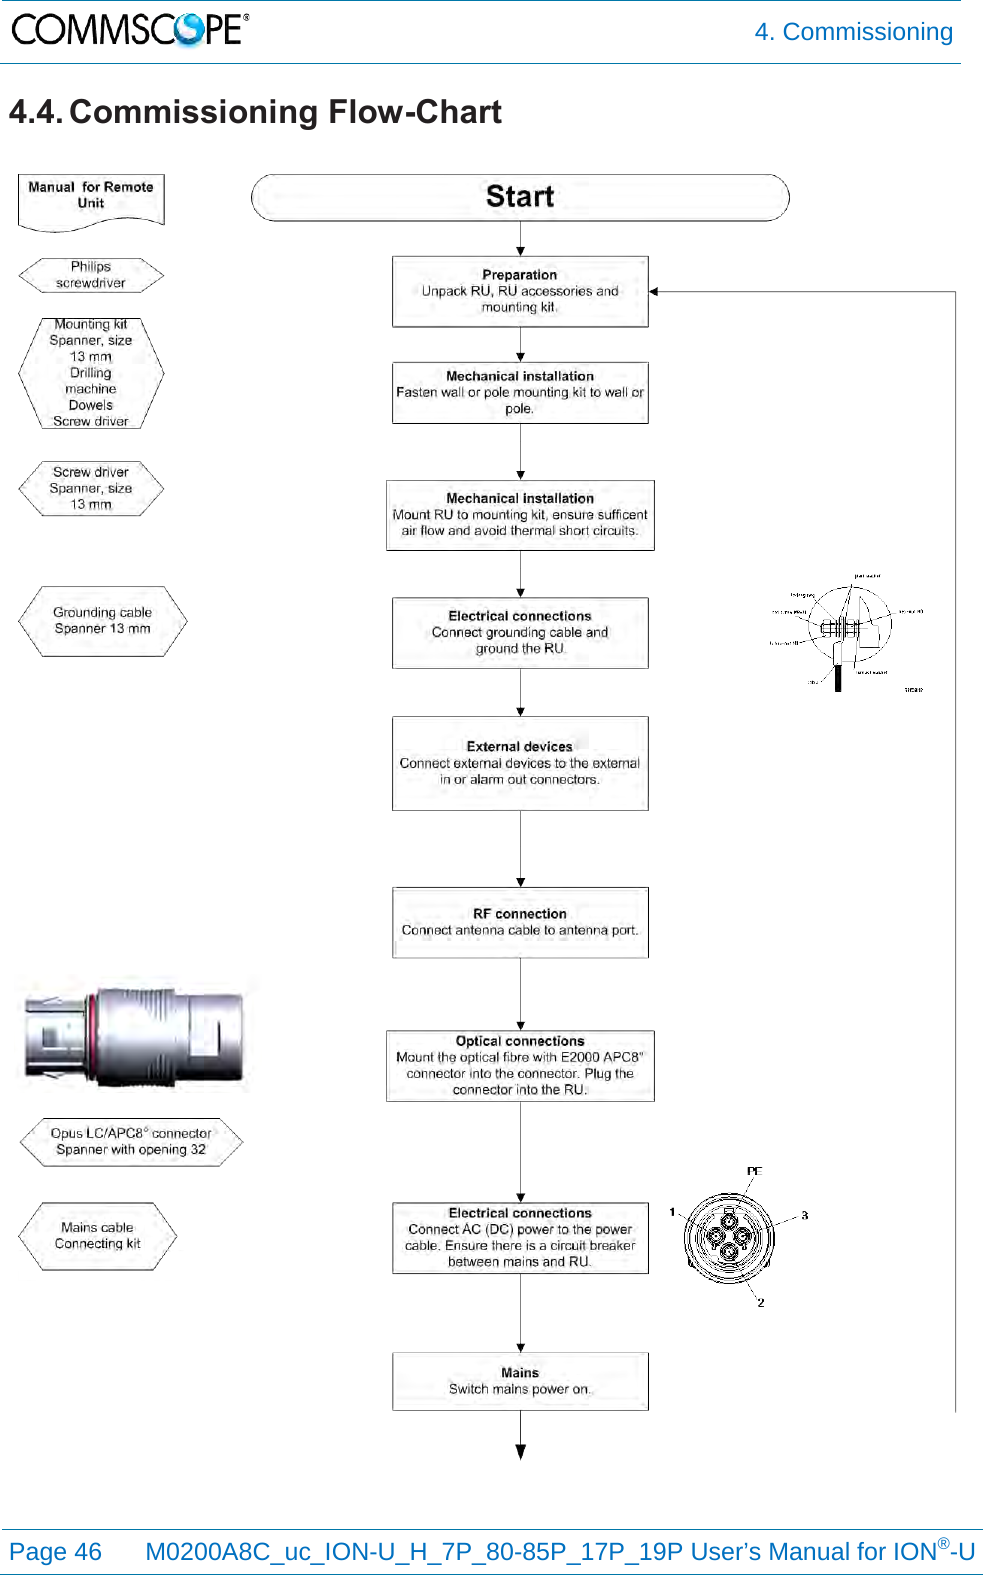  4. Commissioning  Page 46 M0200A8C_uc_ION-U_H_7P_80-85P_17P_19P User’s Manual for ION®-U  4.4. Commissioning Flow-Chart   